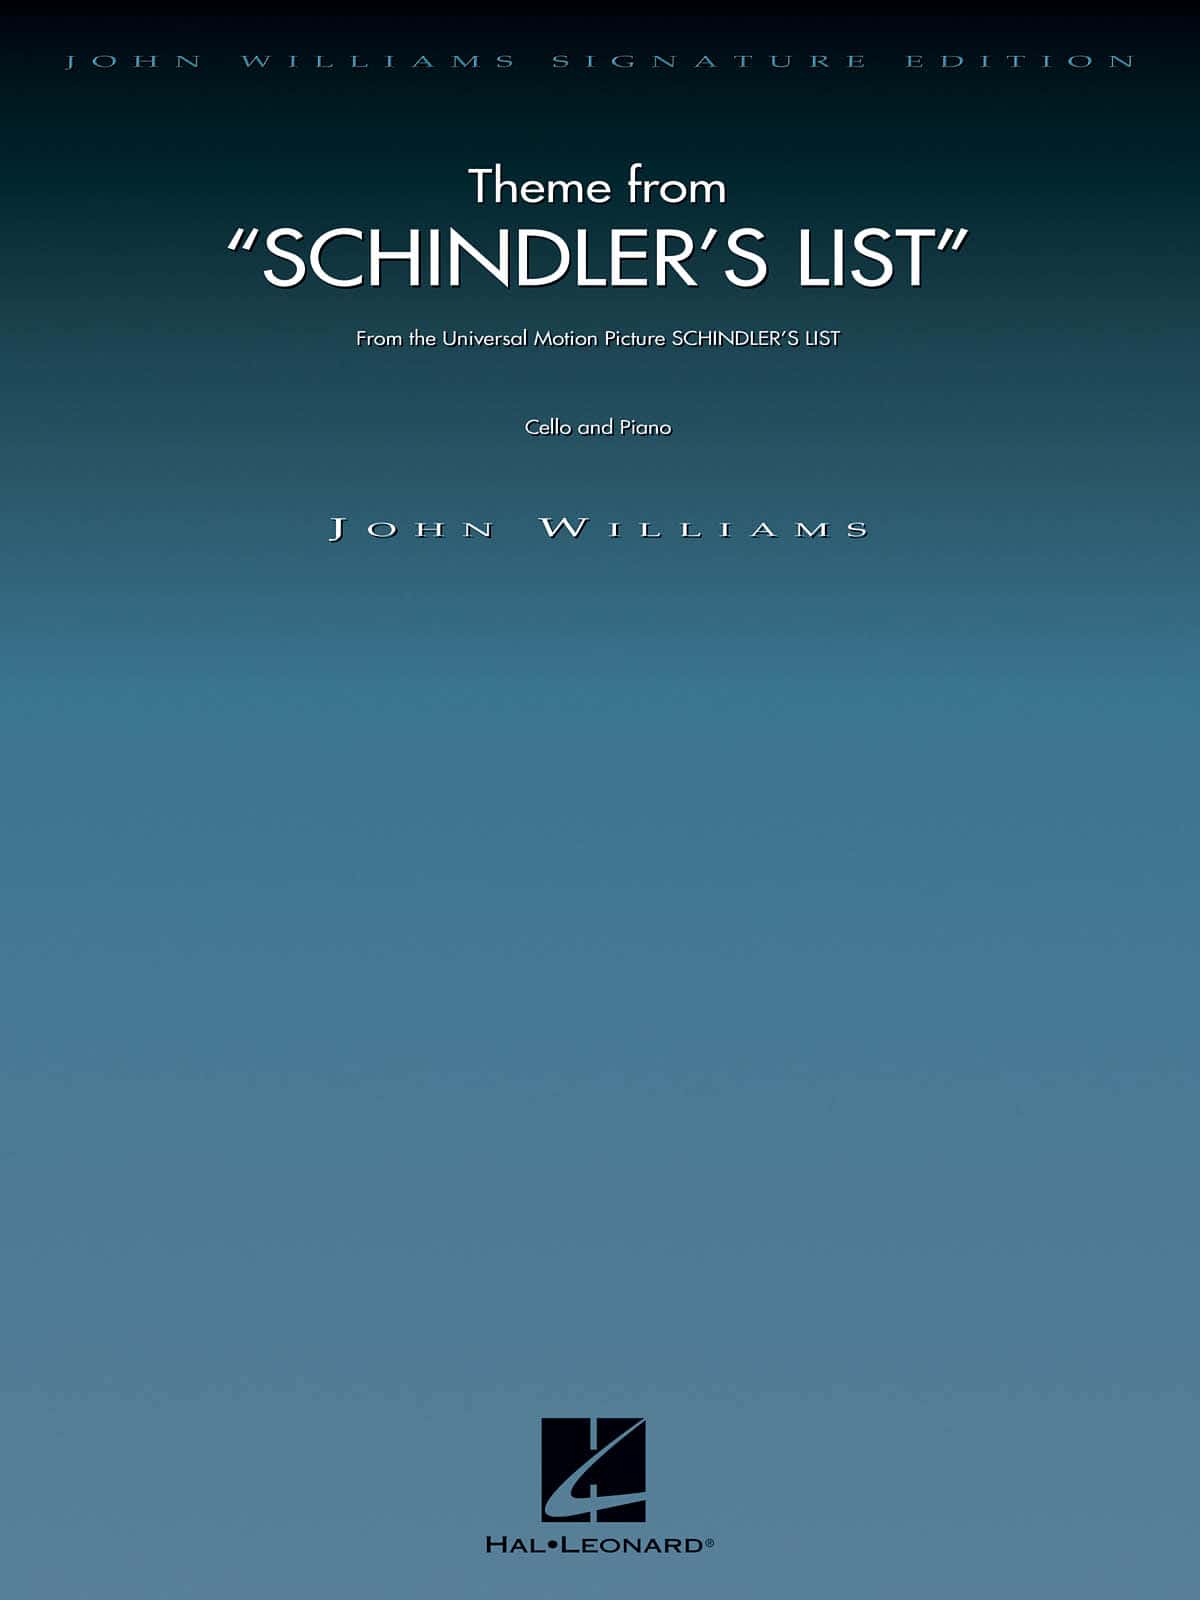 HAL LEONARD JOHN WILLIAMS - THEME FROM SCHINDLER'S LIST - VIOLONCELLE & PIANO